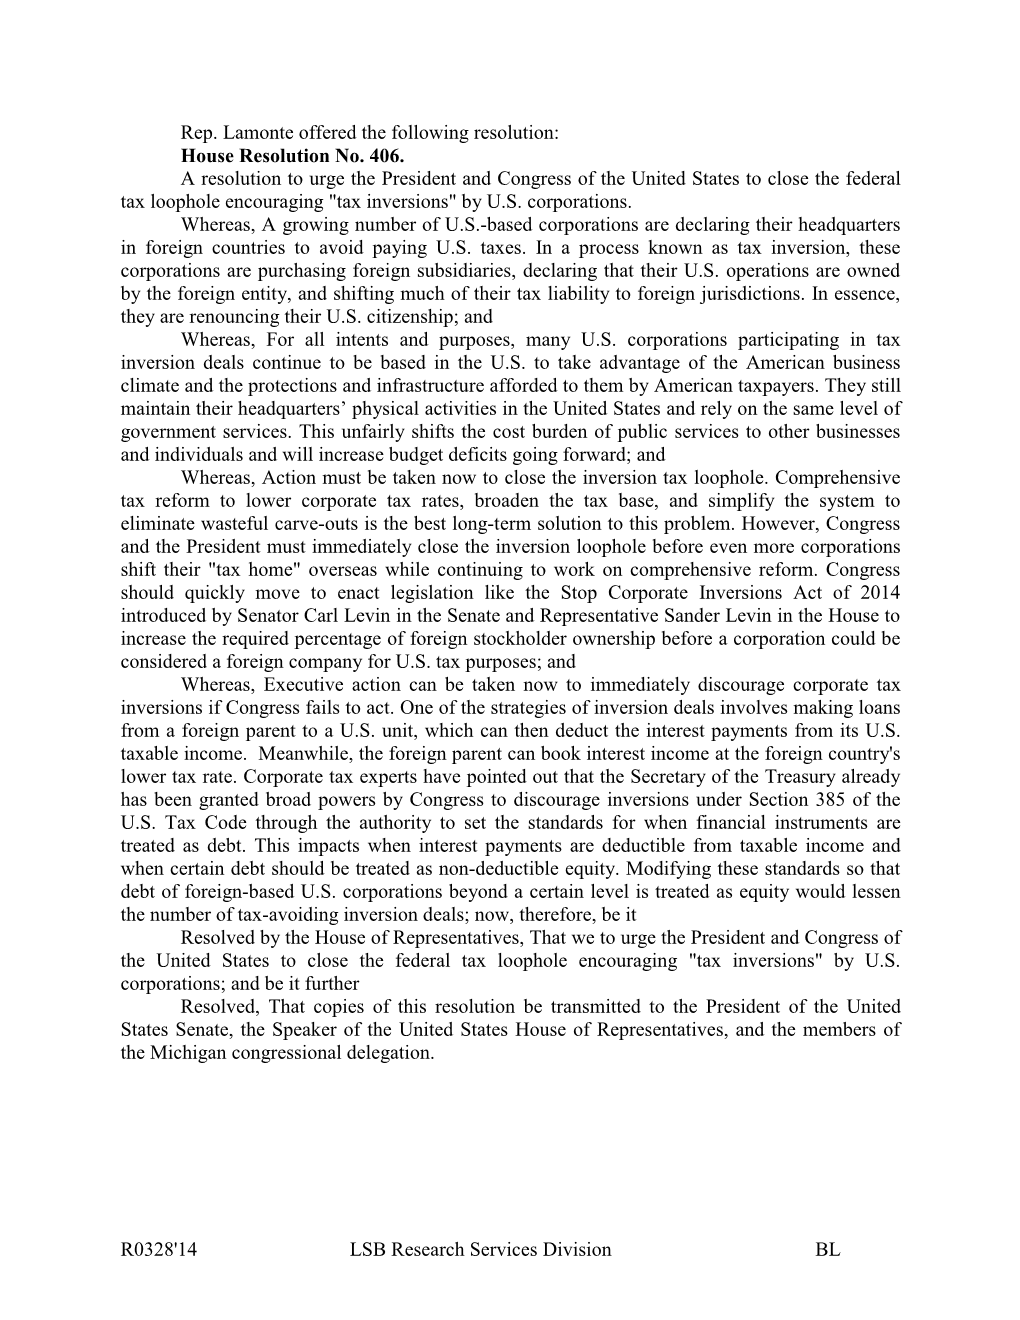 House Resolution No. 406. a Resolution to Urge the President and Congress of the United States to Close the Federal Tax Loophole Encouraging "Tax Inversions" by U.S